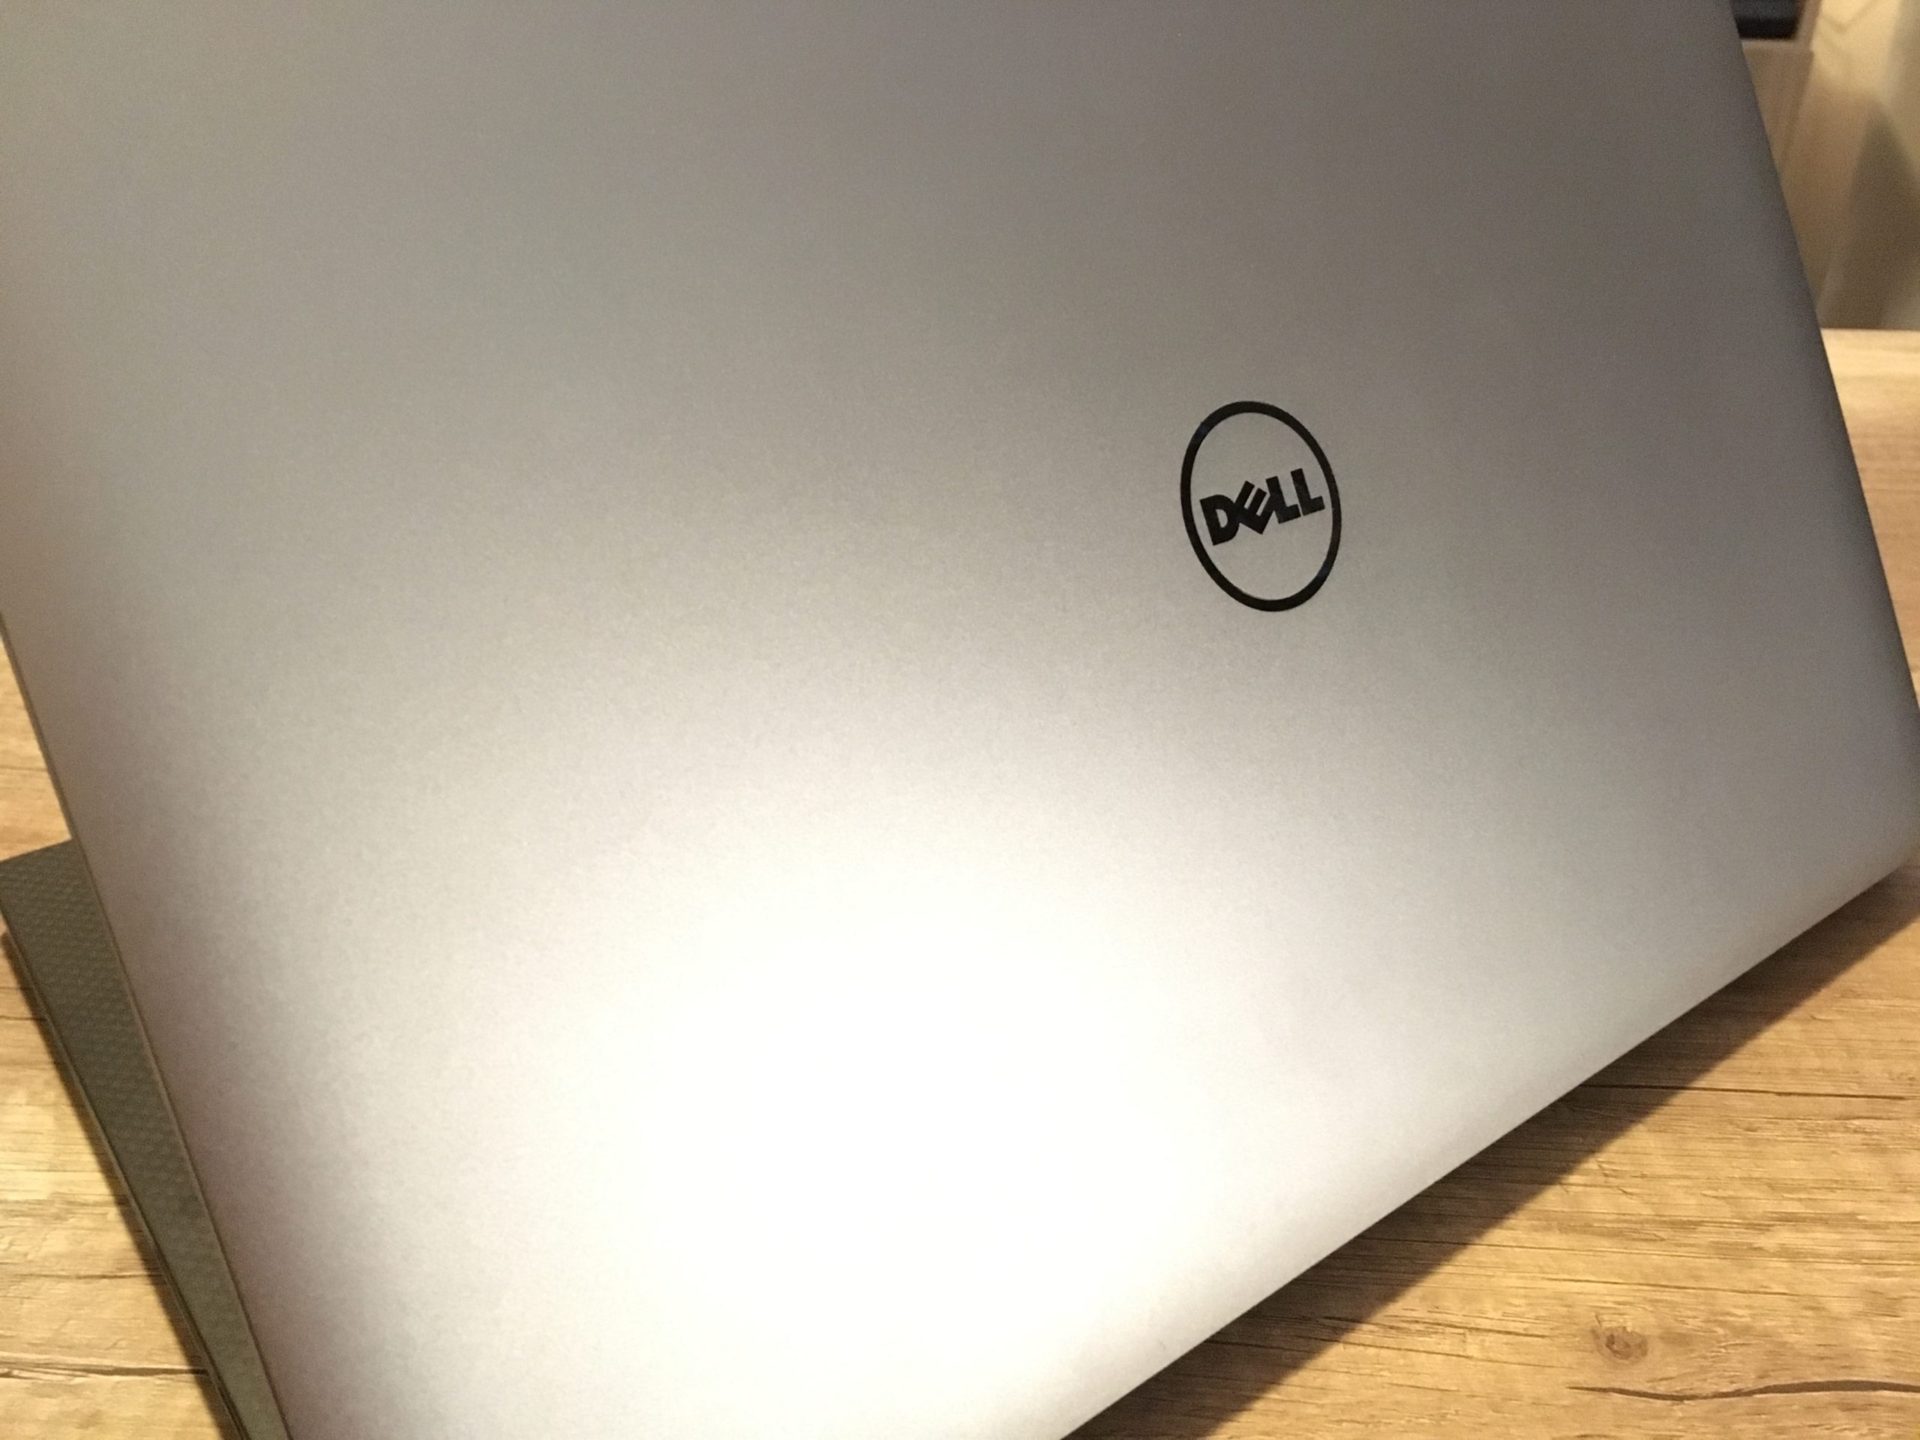 Dell XPS 15 2017